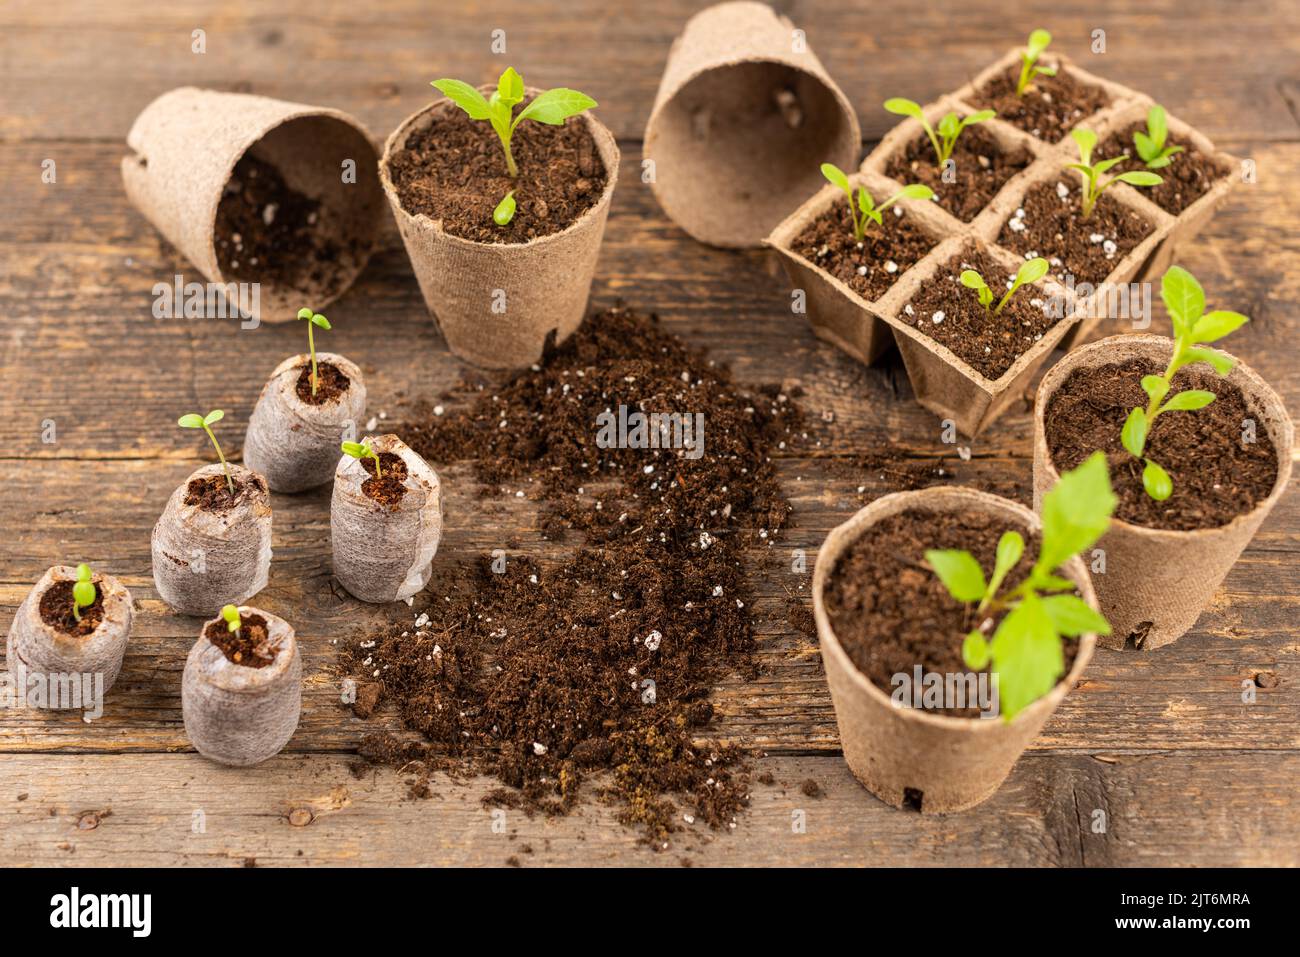 Potted flower seedlings growing in biodegradable peat moss pots. Wooden background with copy space. Zero waste, recycling, plastic free concept. Stock Photo